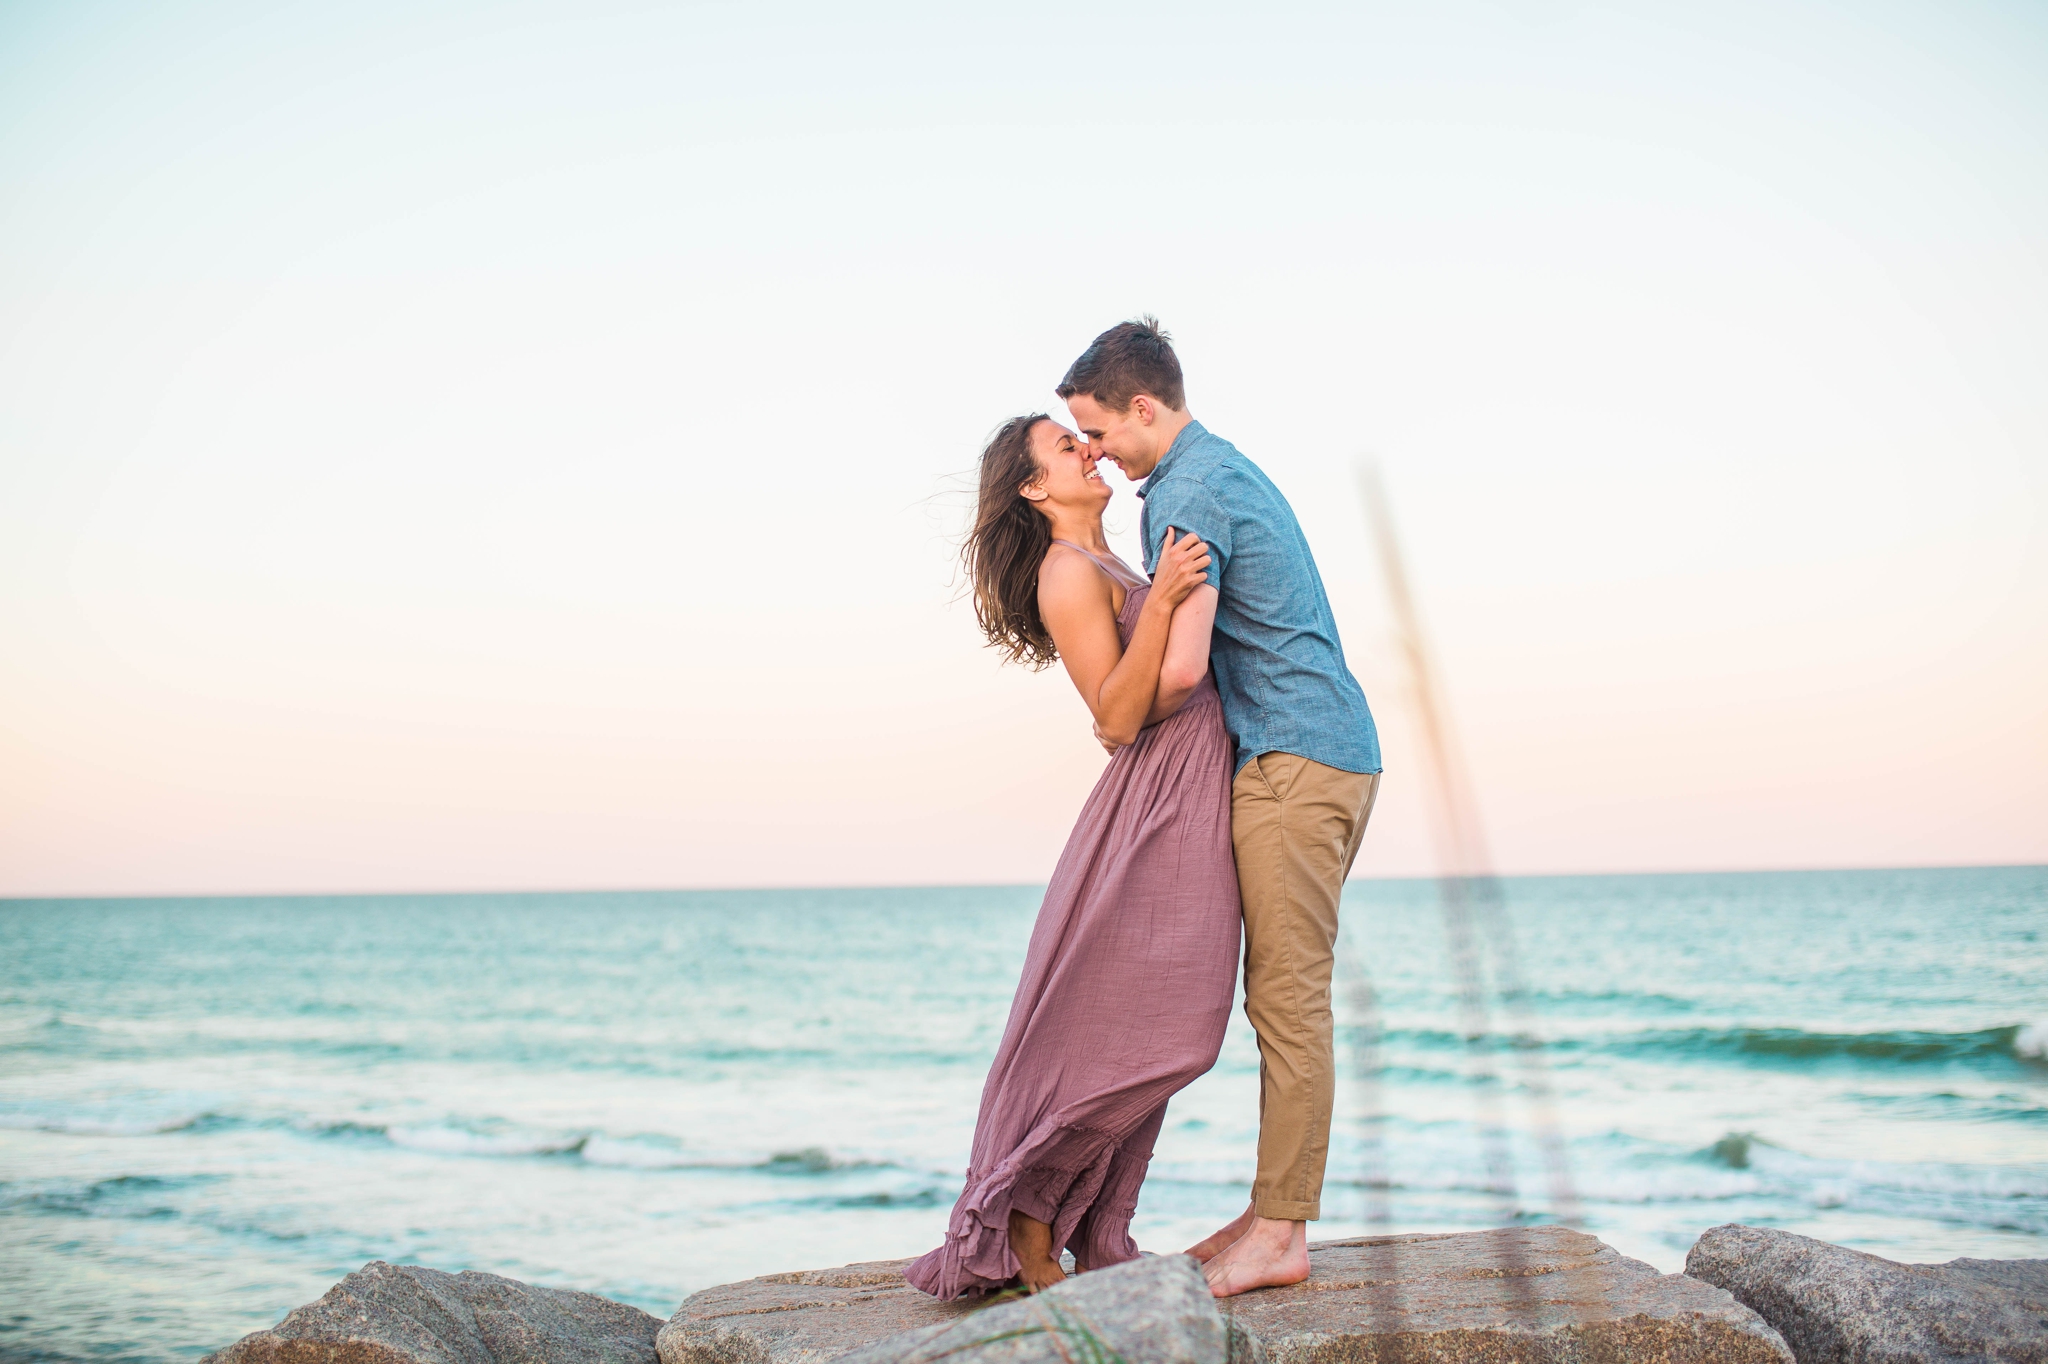  couple on the cliffs kissing - Woman is in a flowy pastel maxi dress - candid and unposed golden light session - beach engagement photographer in honolulu, oahu, hawaii - johanna dye photography 